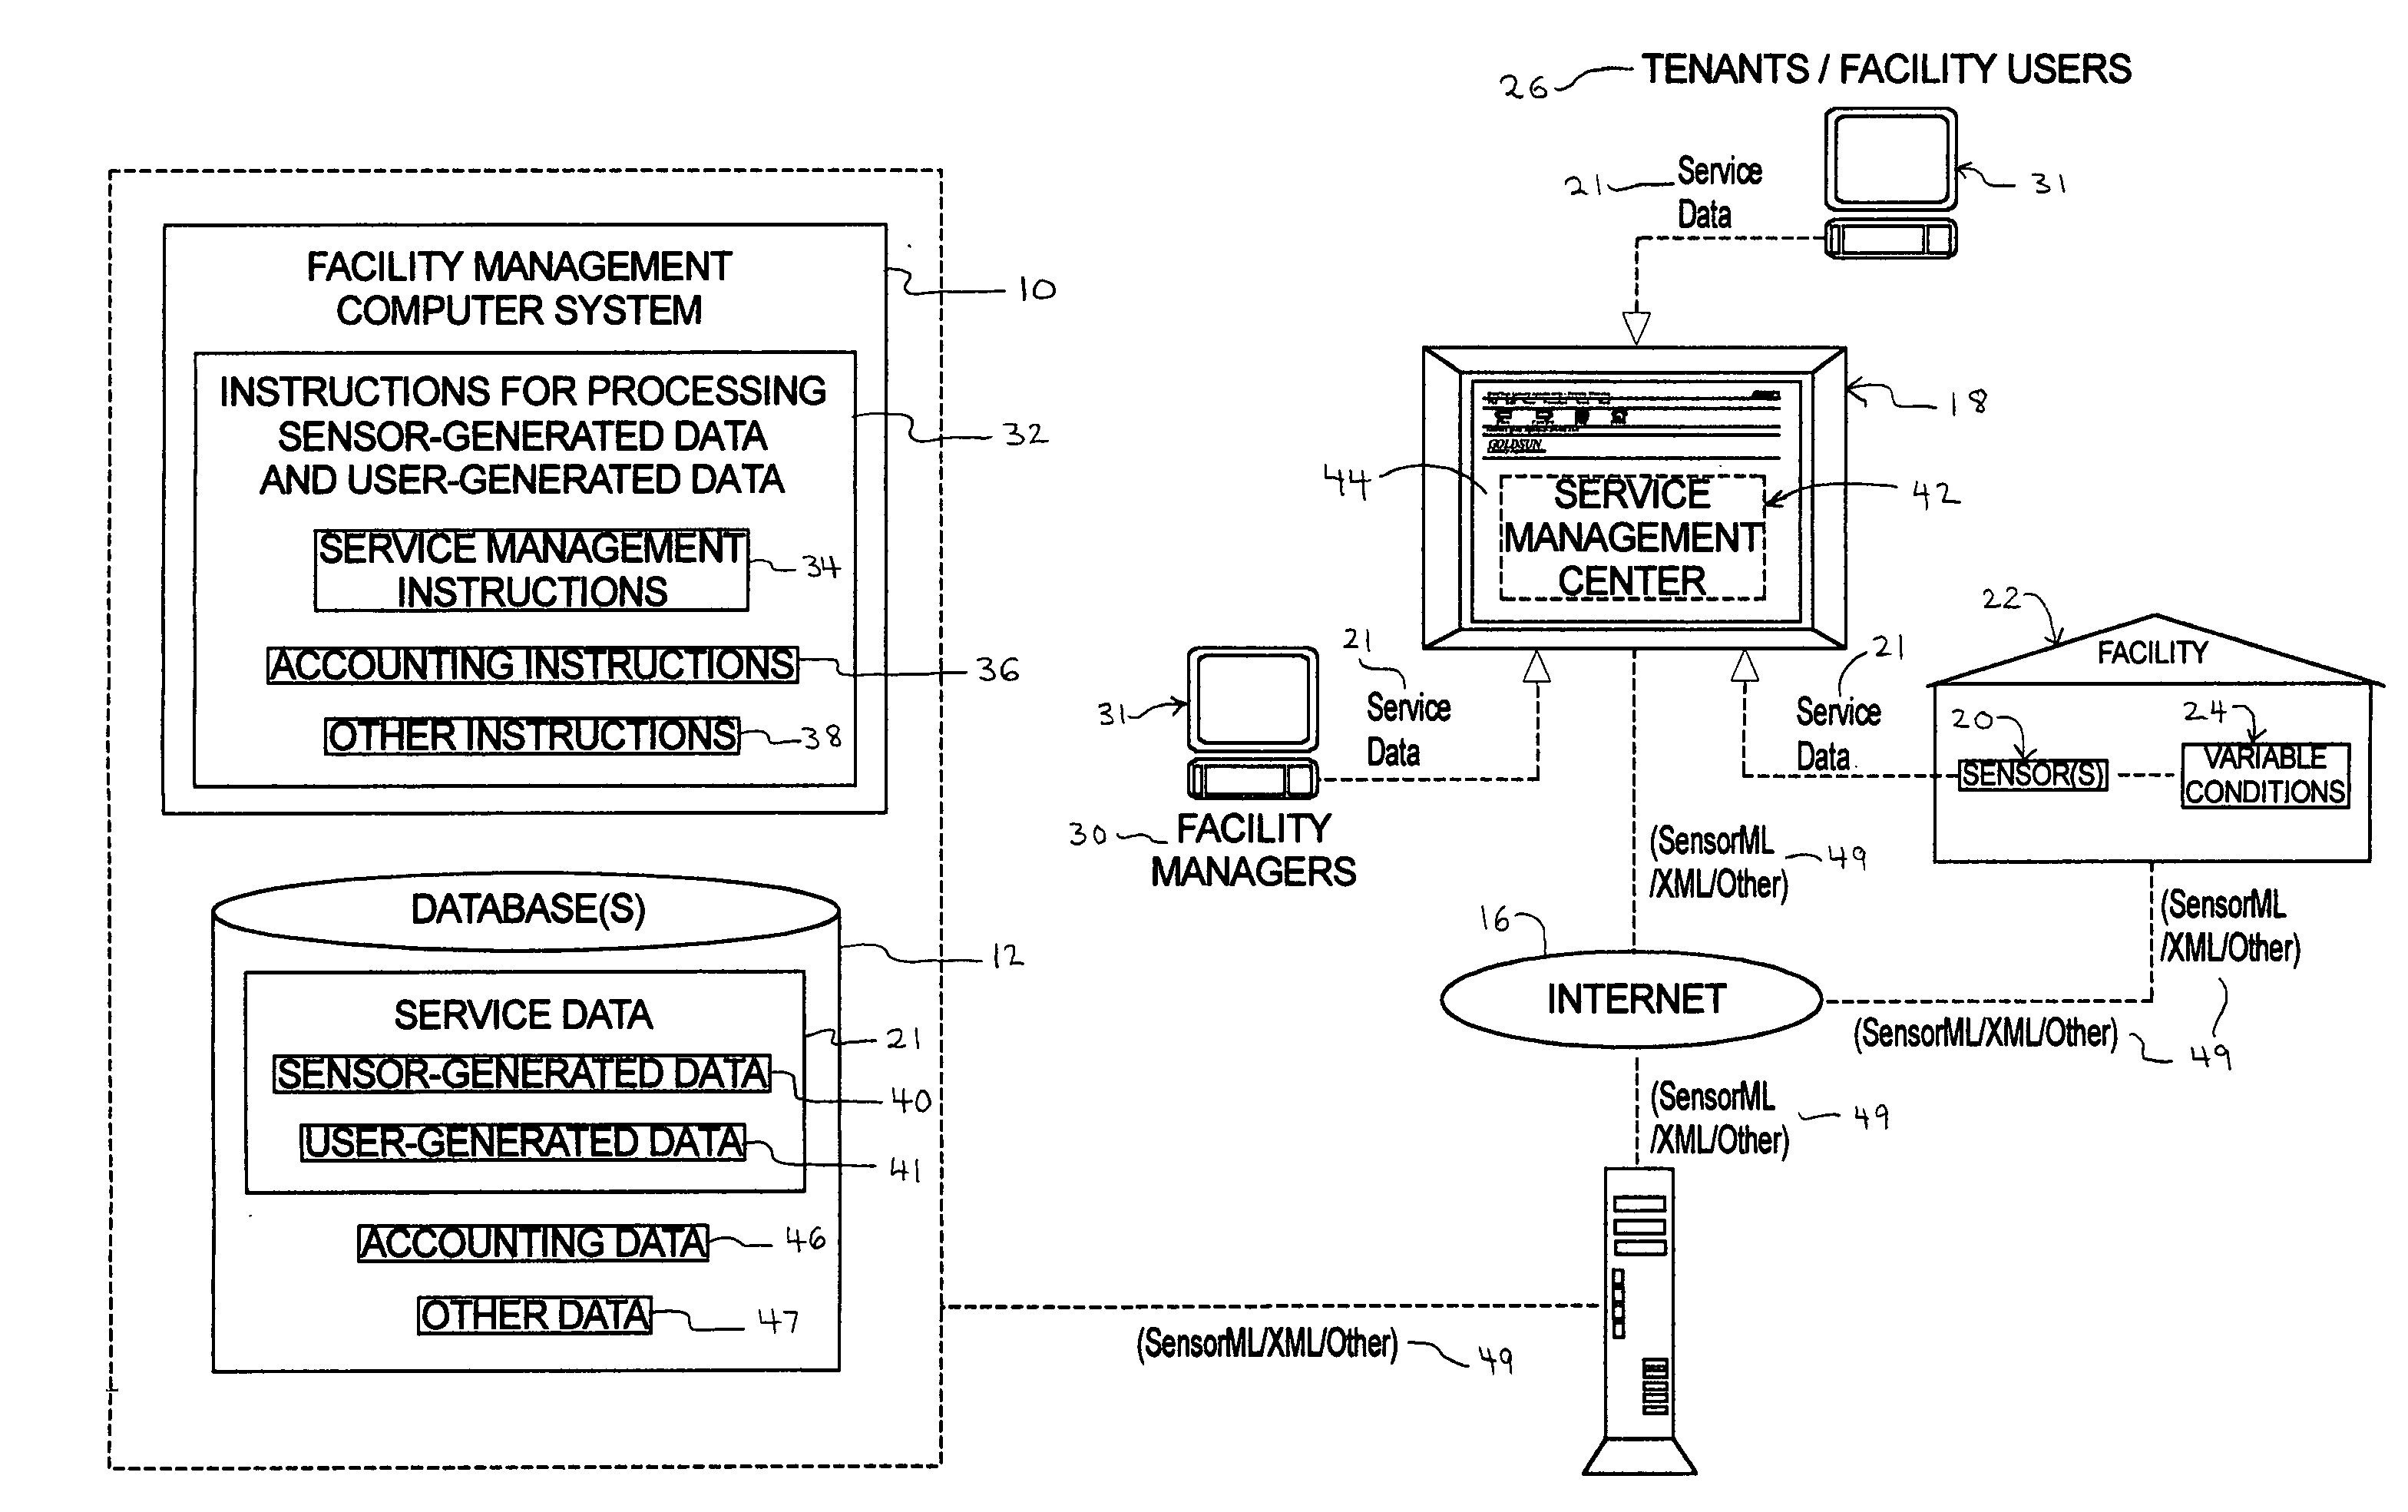 Facility management computer system operable for receiving data over a network generated by users and sensors